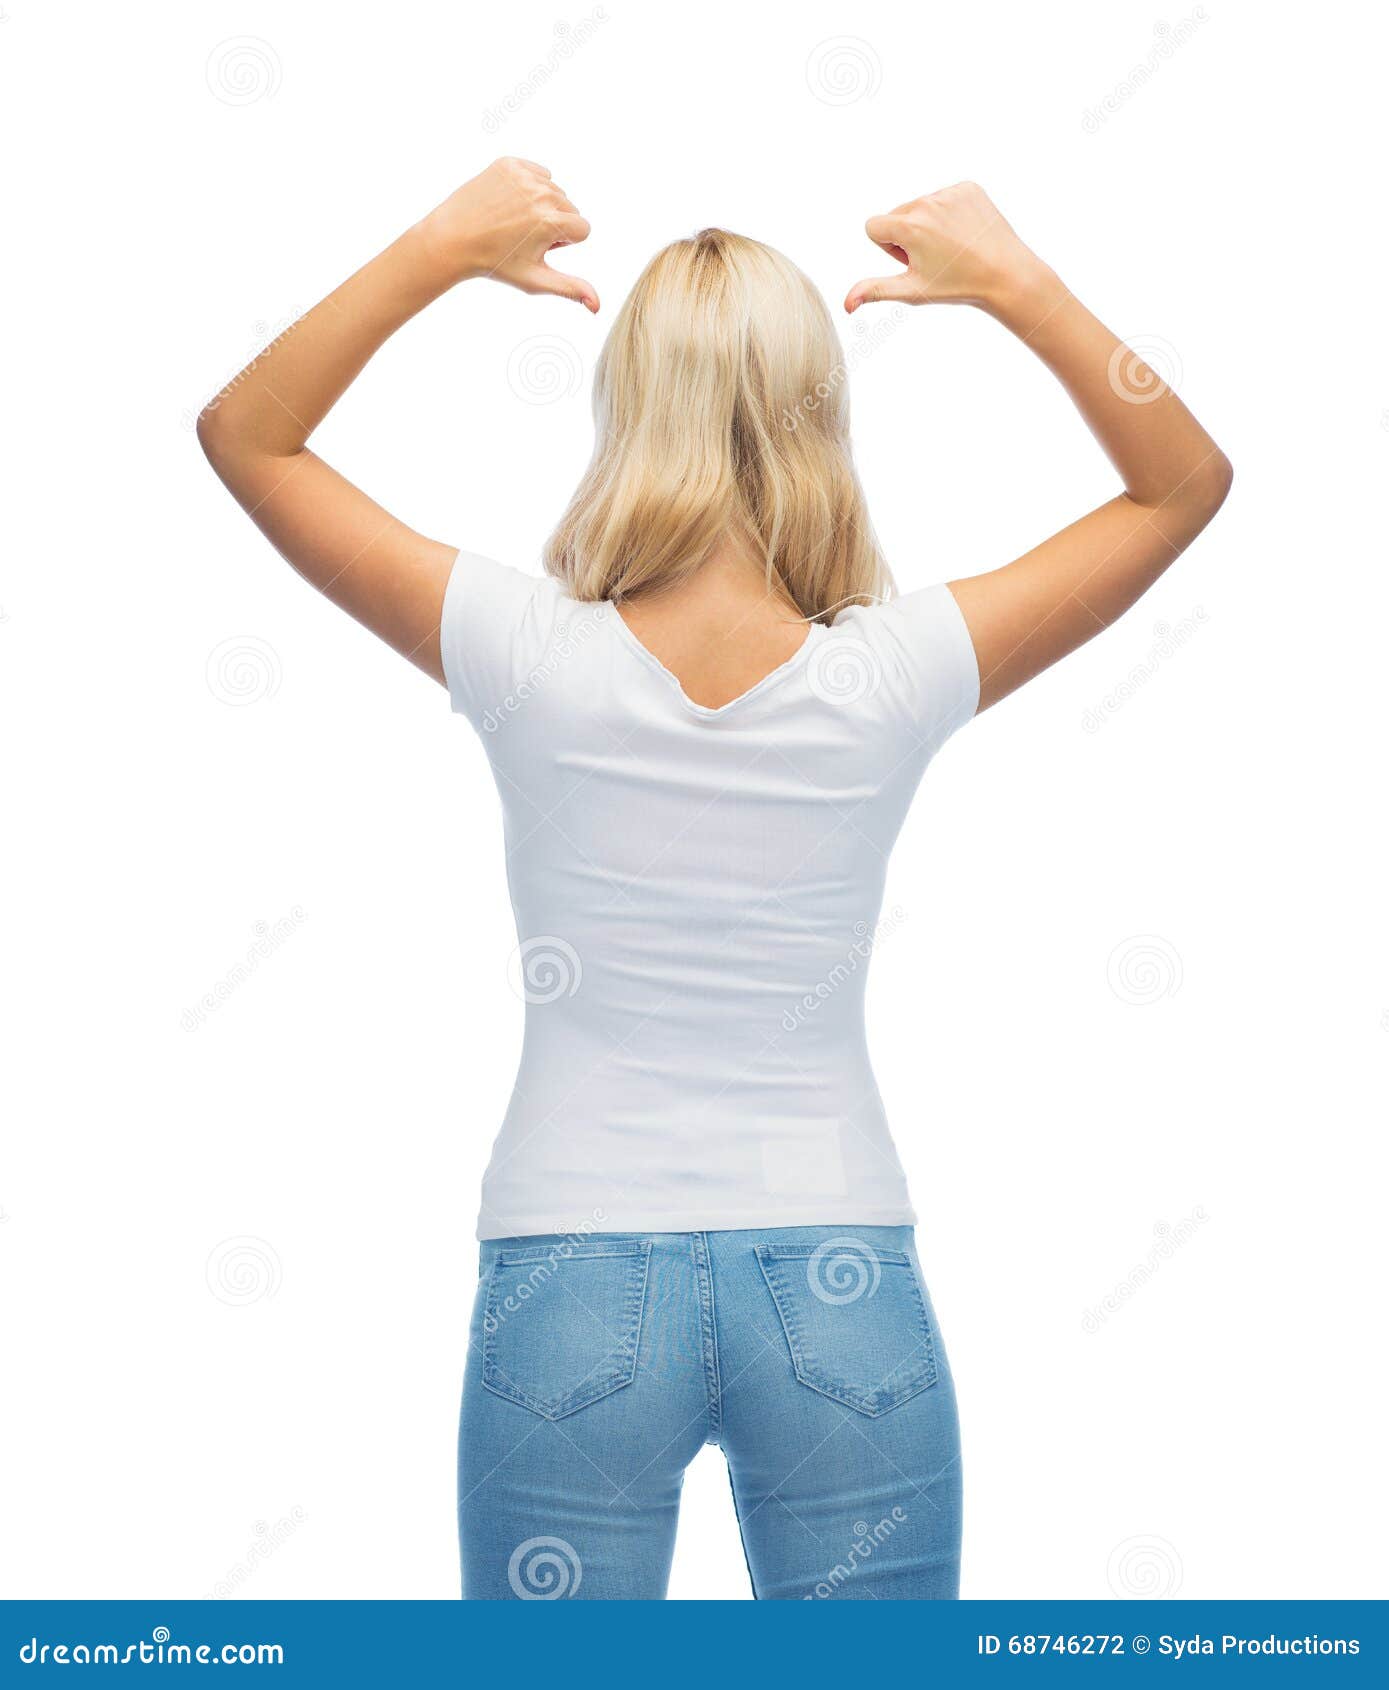 Download Rear View Of Young Woman In Blank White T-shirt Stock ...